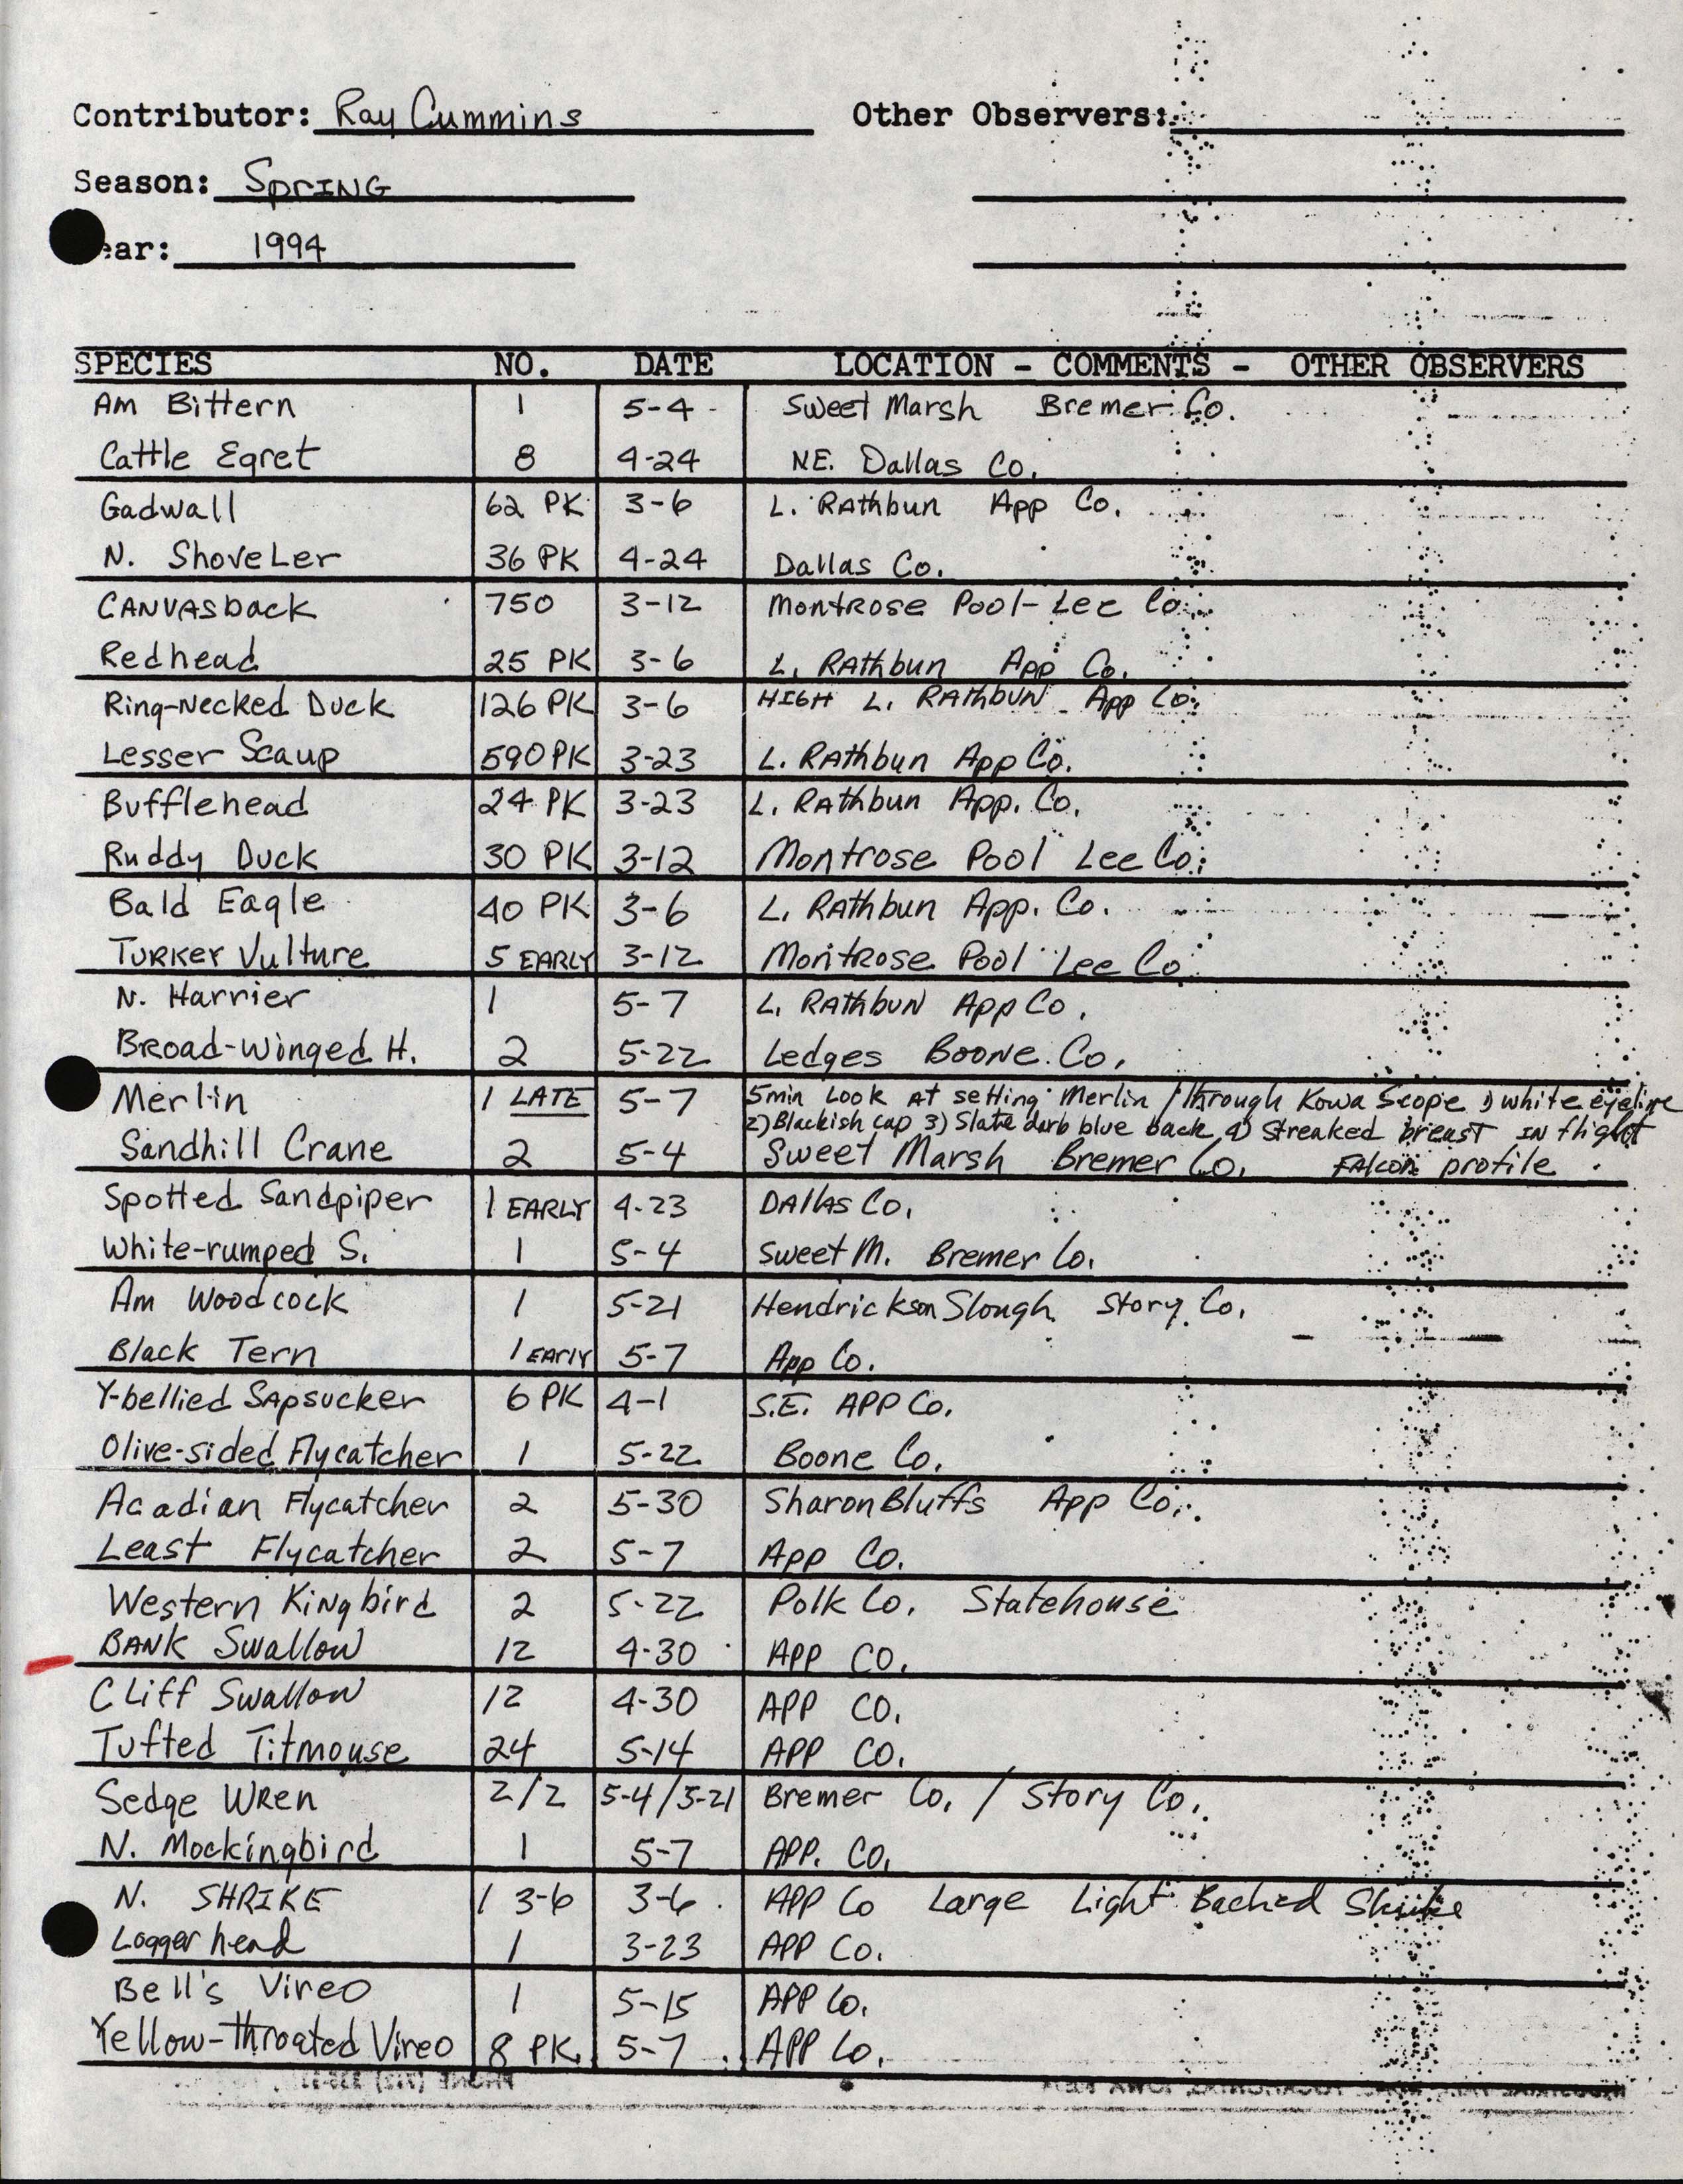 Annotated bird sighting list for Spring 1994 compiled by Ray Cummins